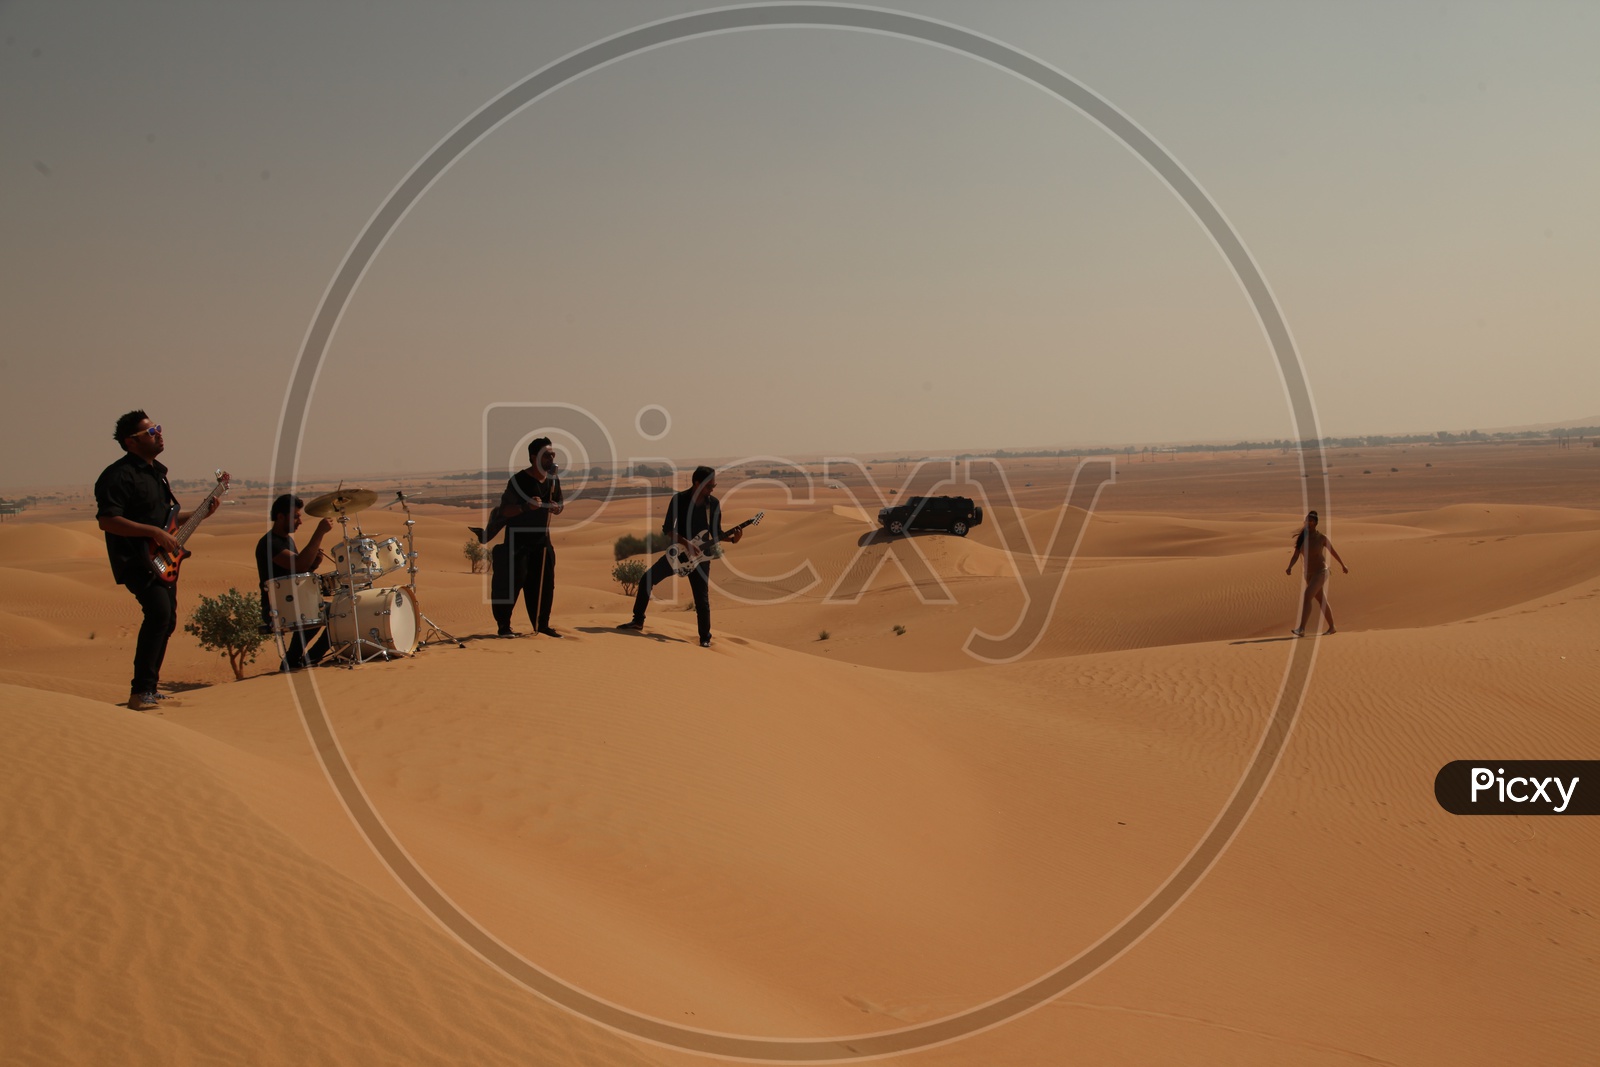 A Music Band Performing In Desert Sand Dunes For a Music album